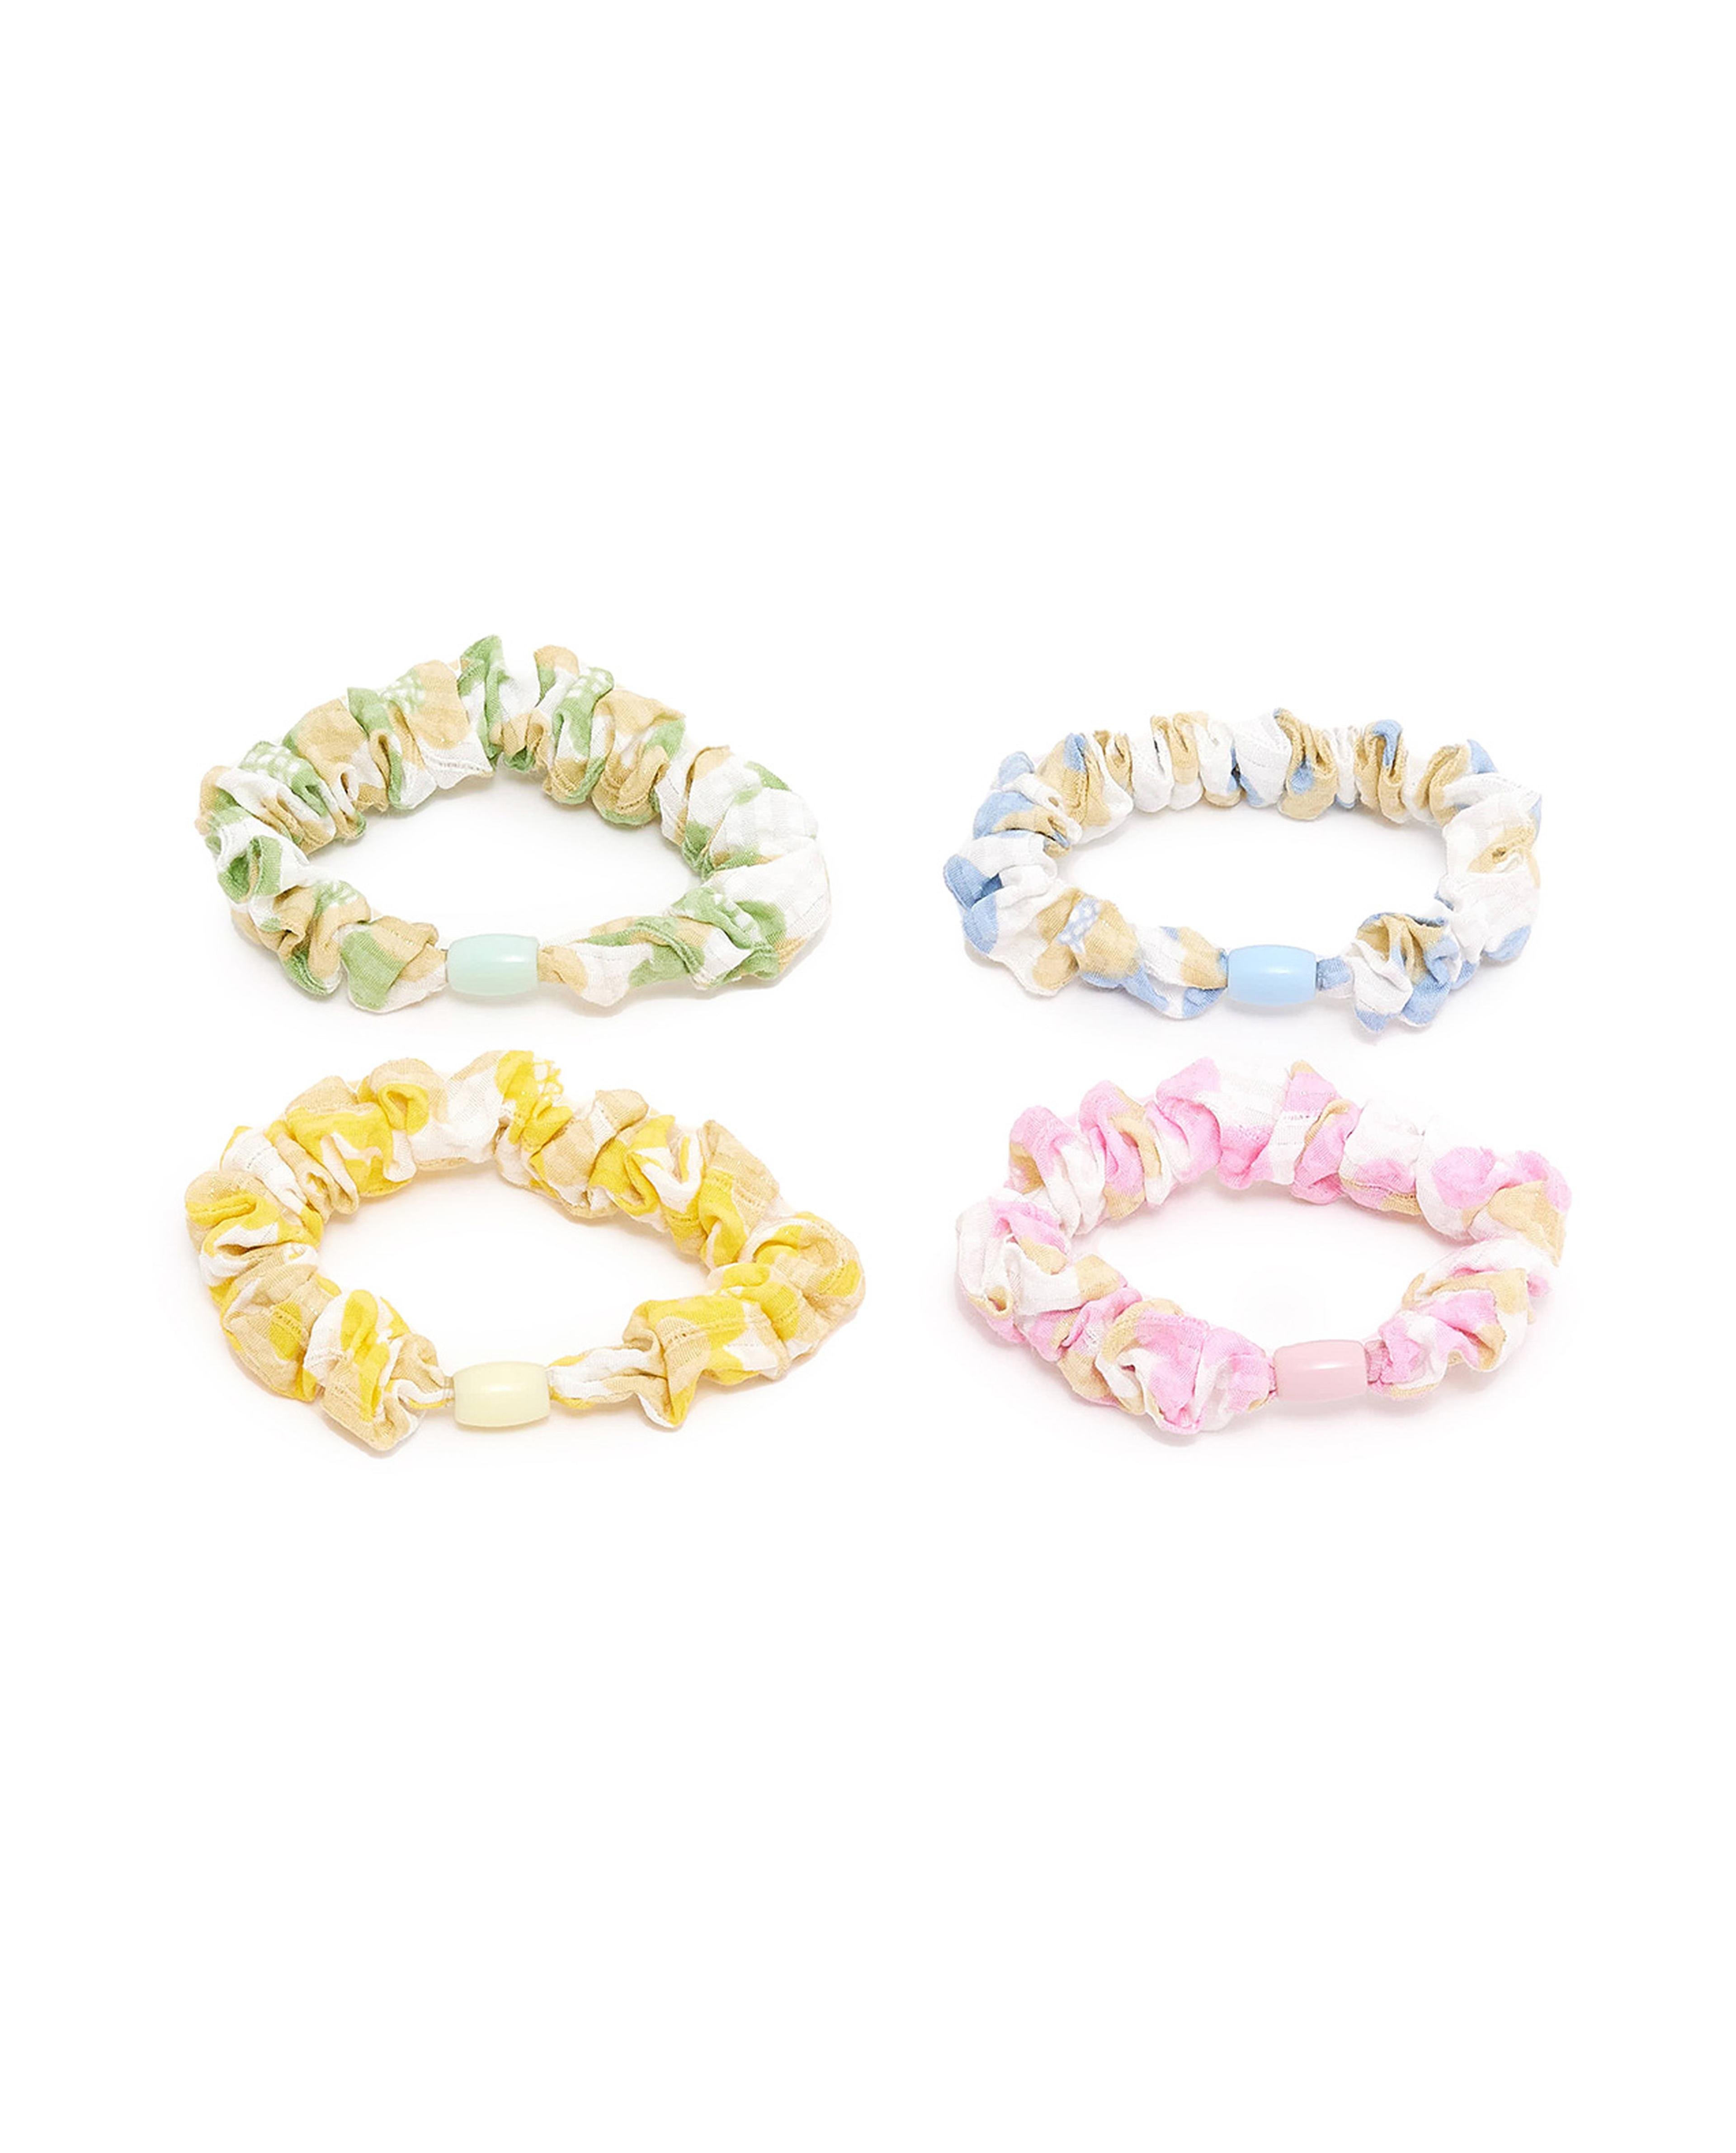 Pack of 4 Thin Scrunchies